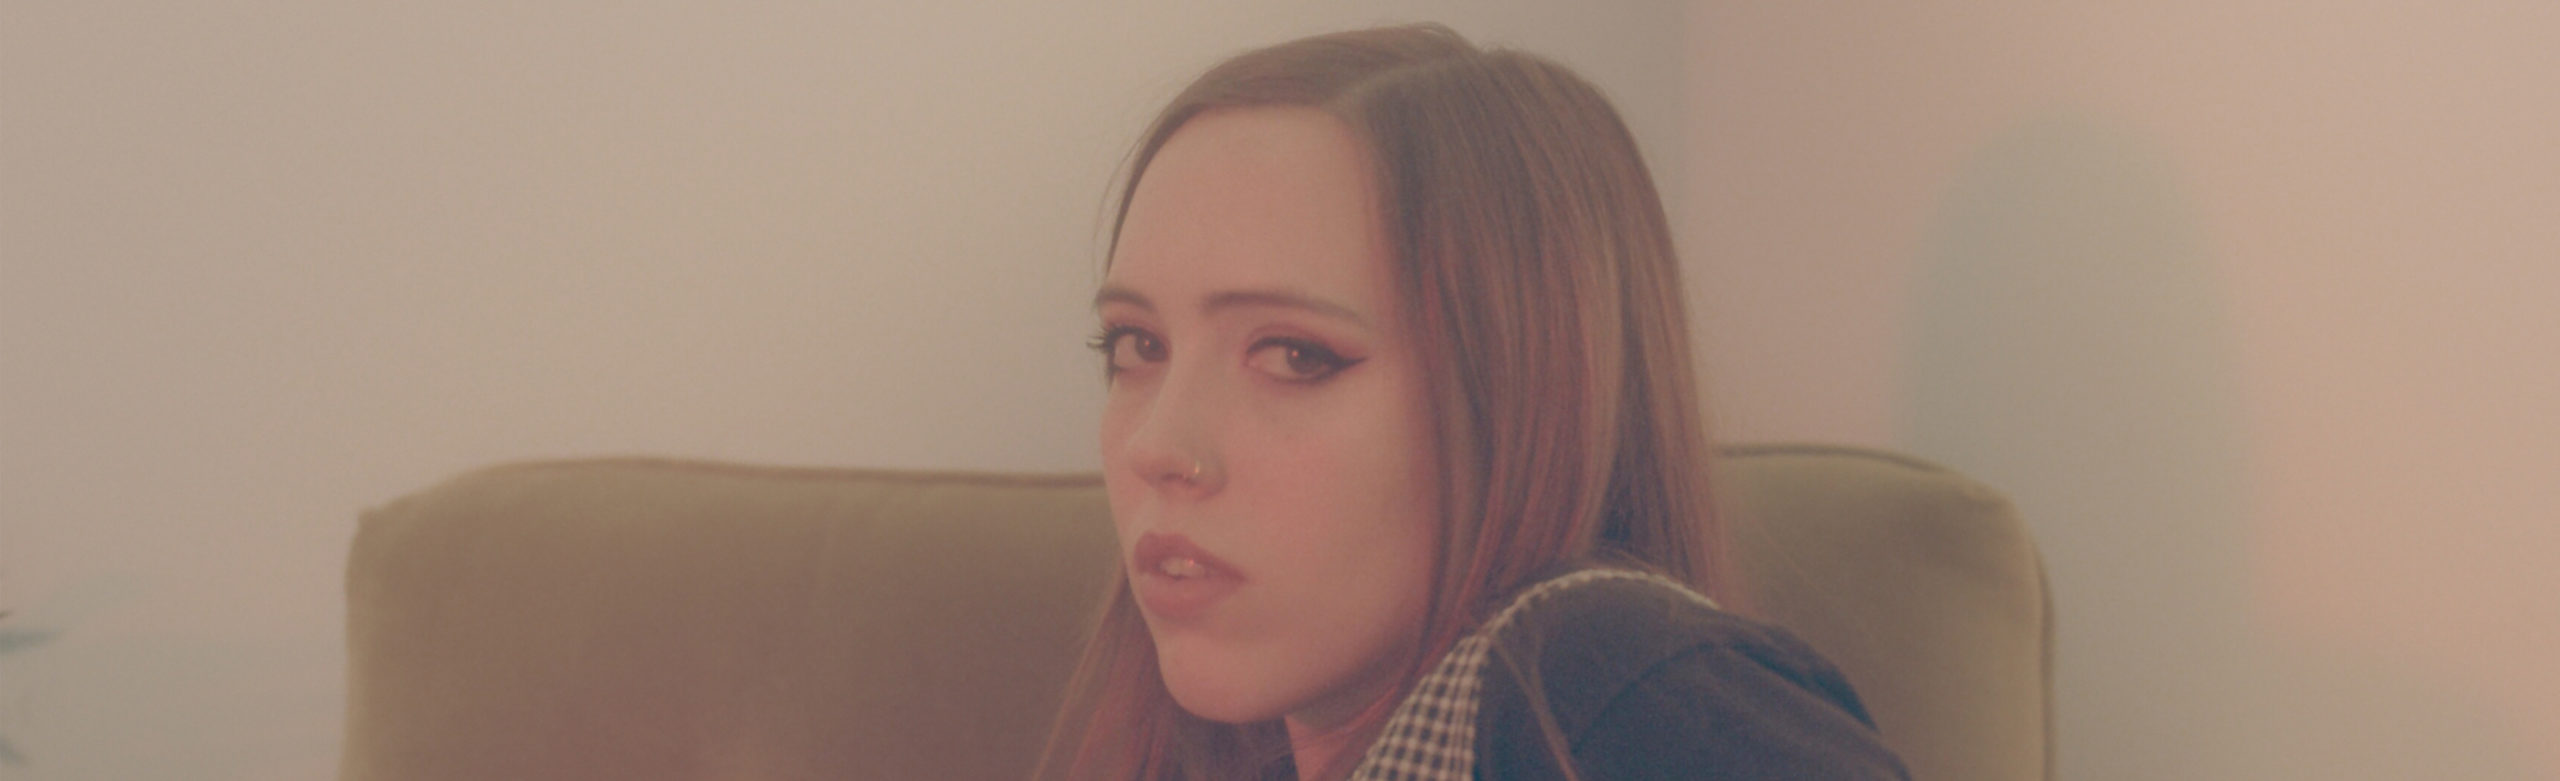 Event Info: Soccer Mommy at the Top Hat 2019 Image